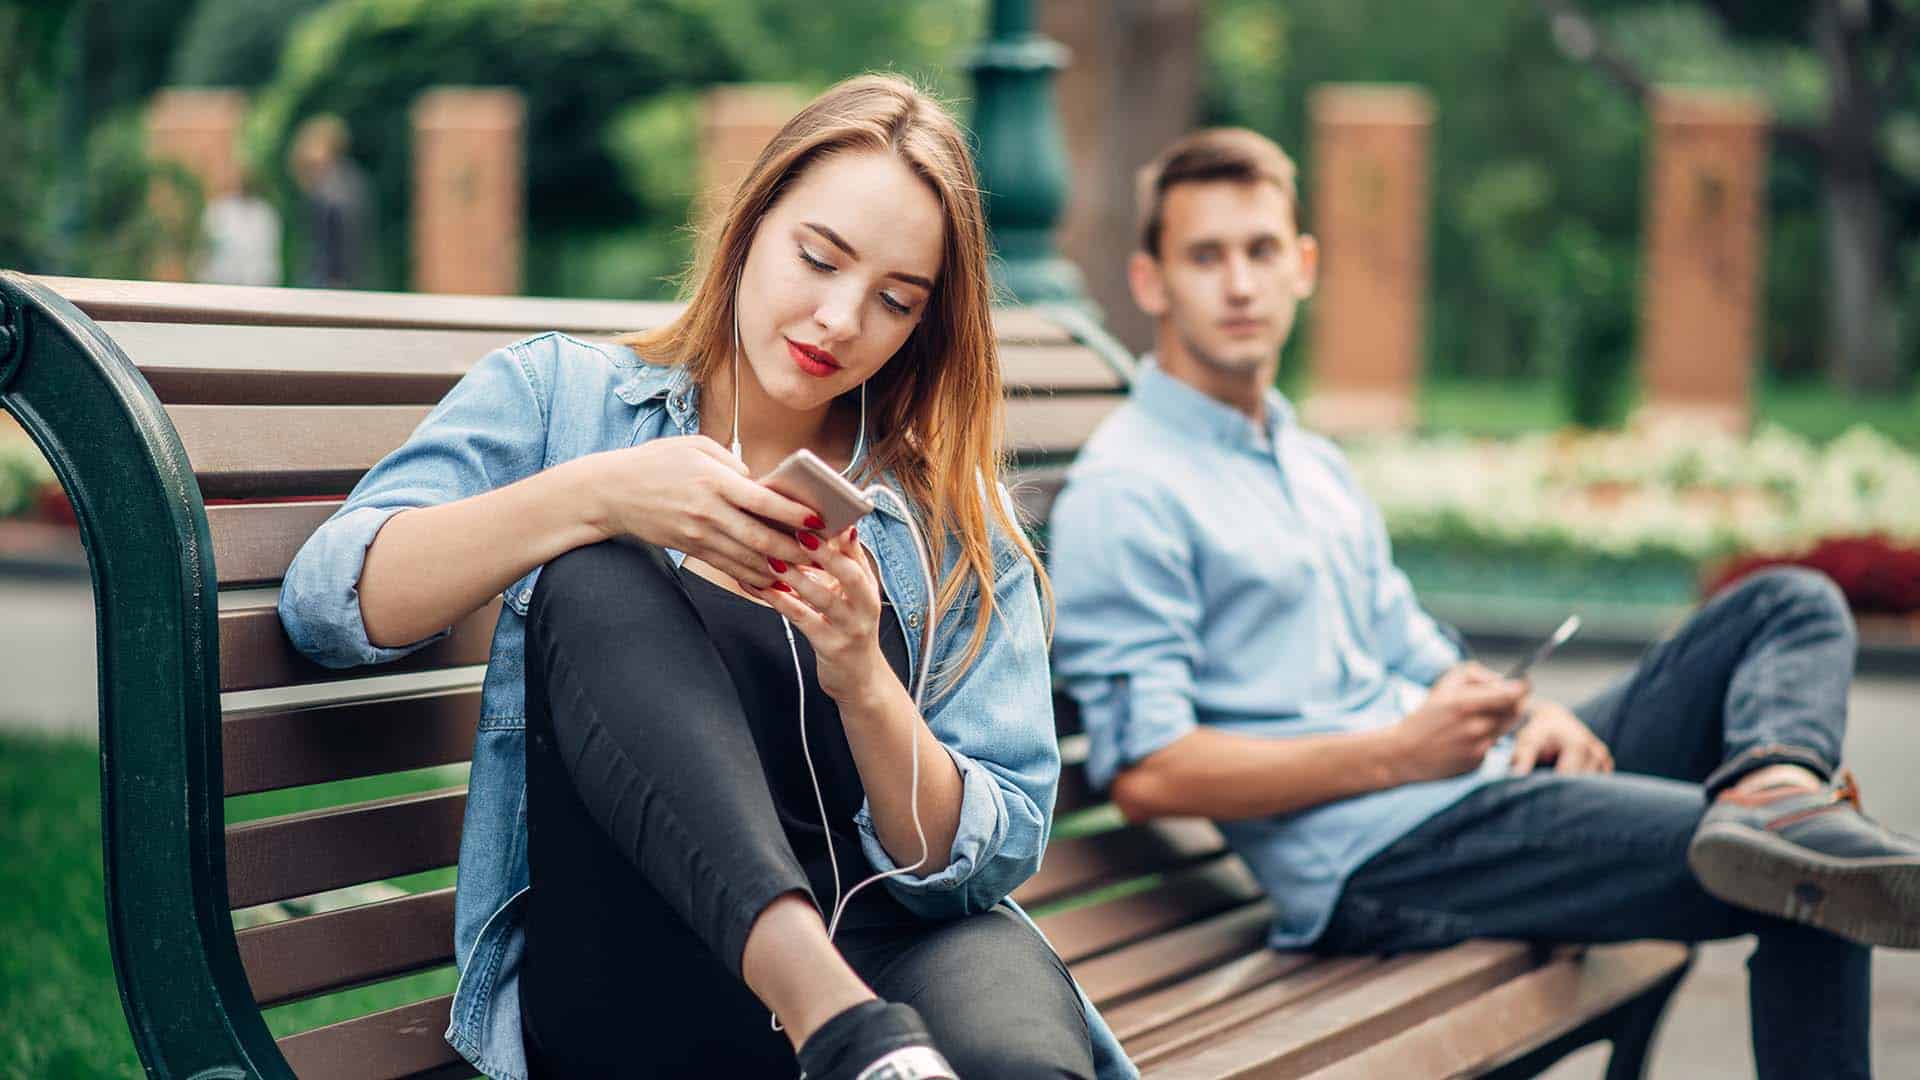 Phone addiction, smiling couple on the bench in park. Man and woman using their smartphones, social addicted people